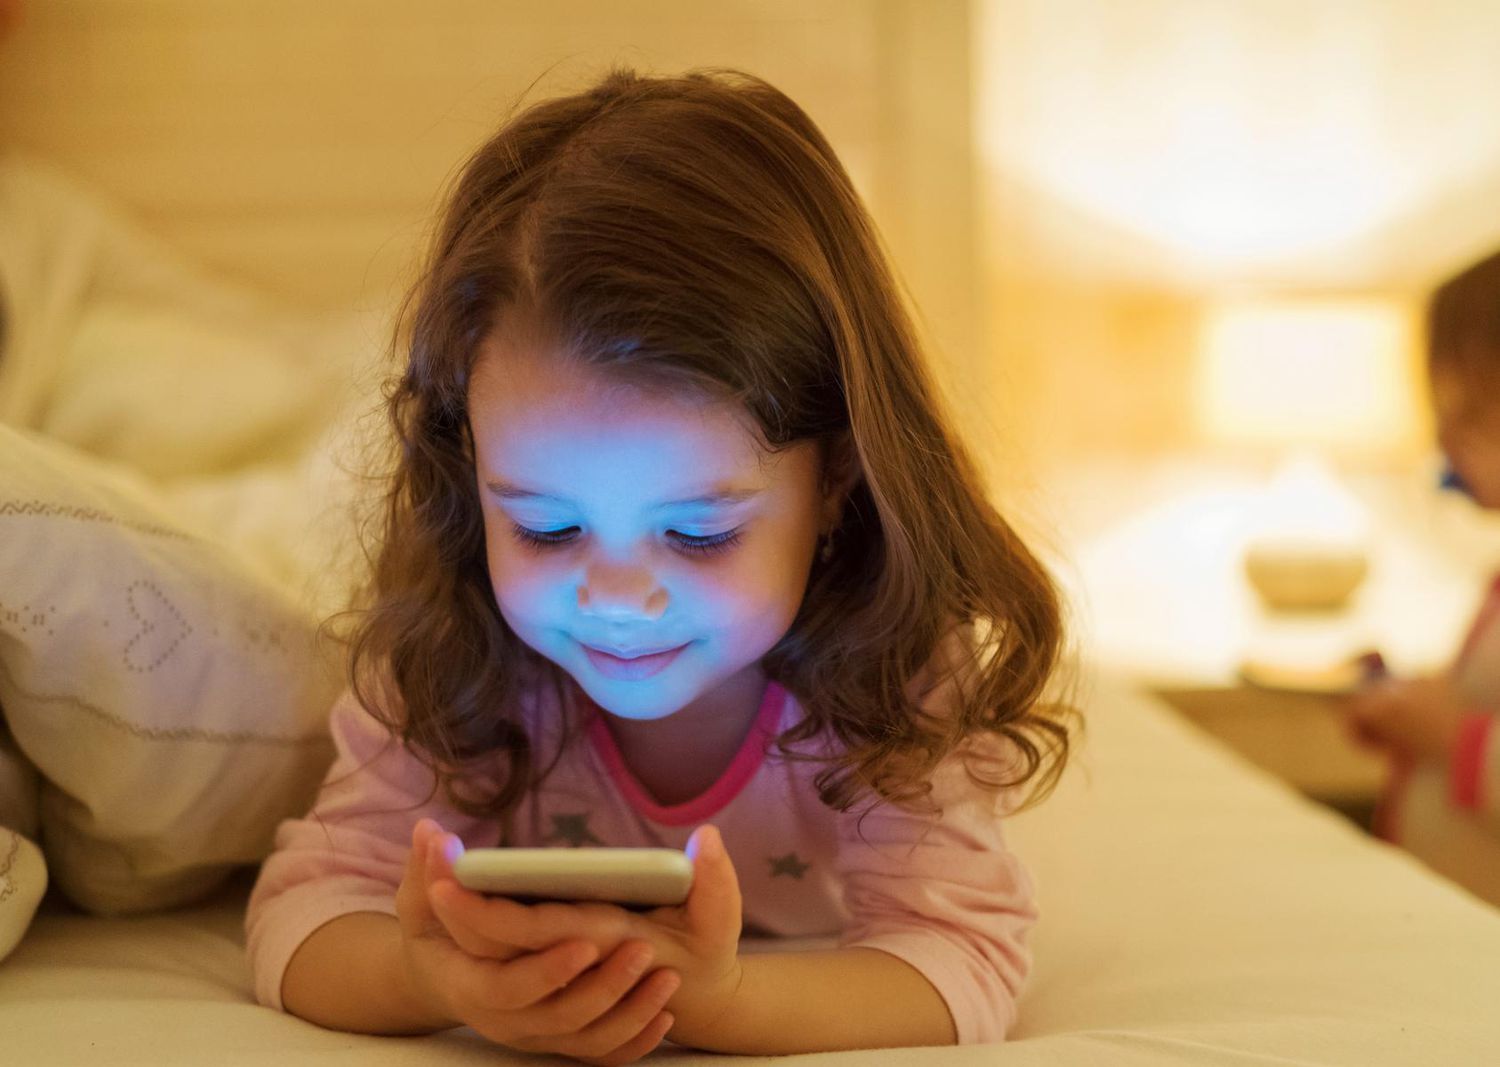 Kid With Phone in Bed